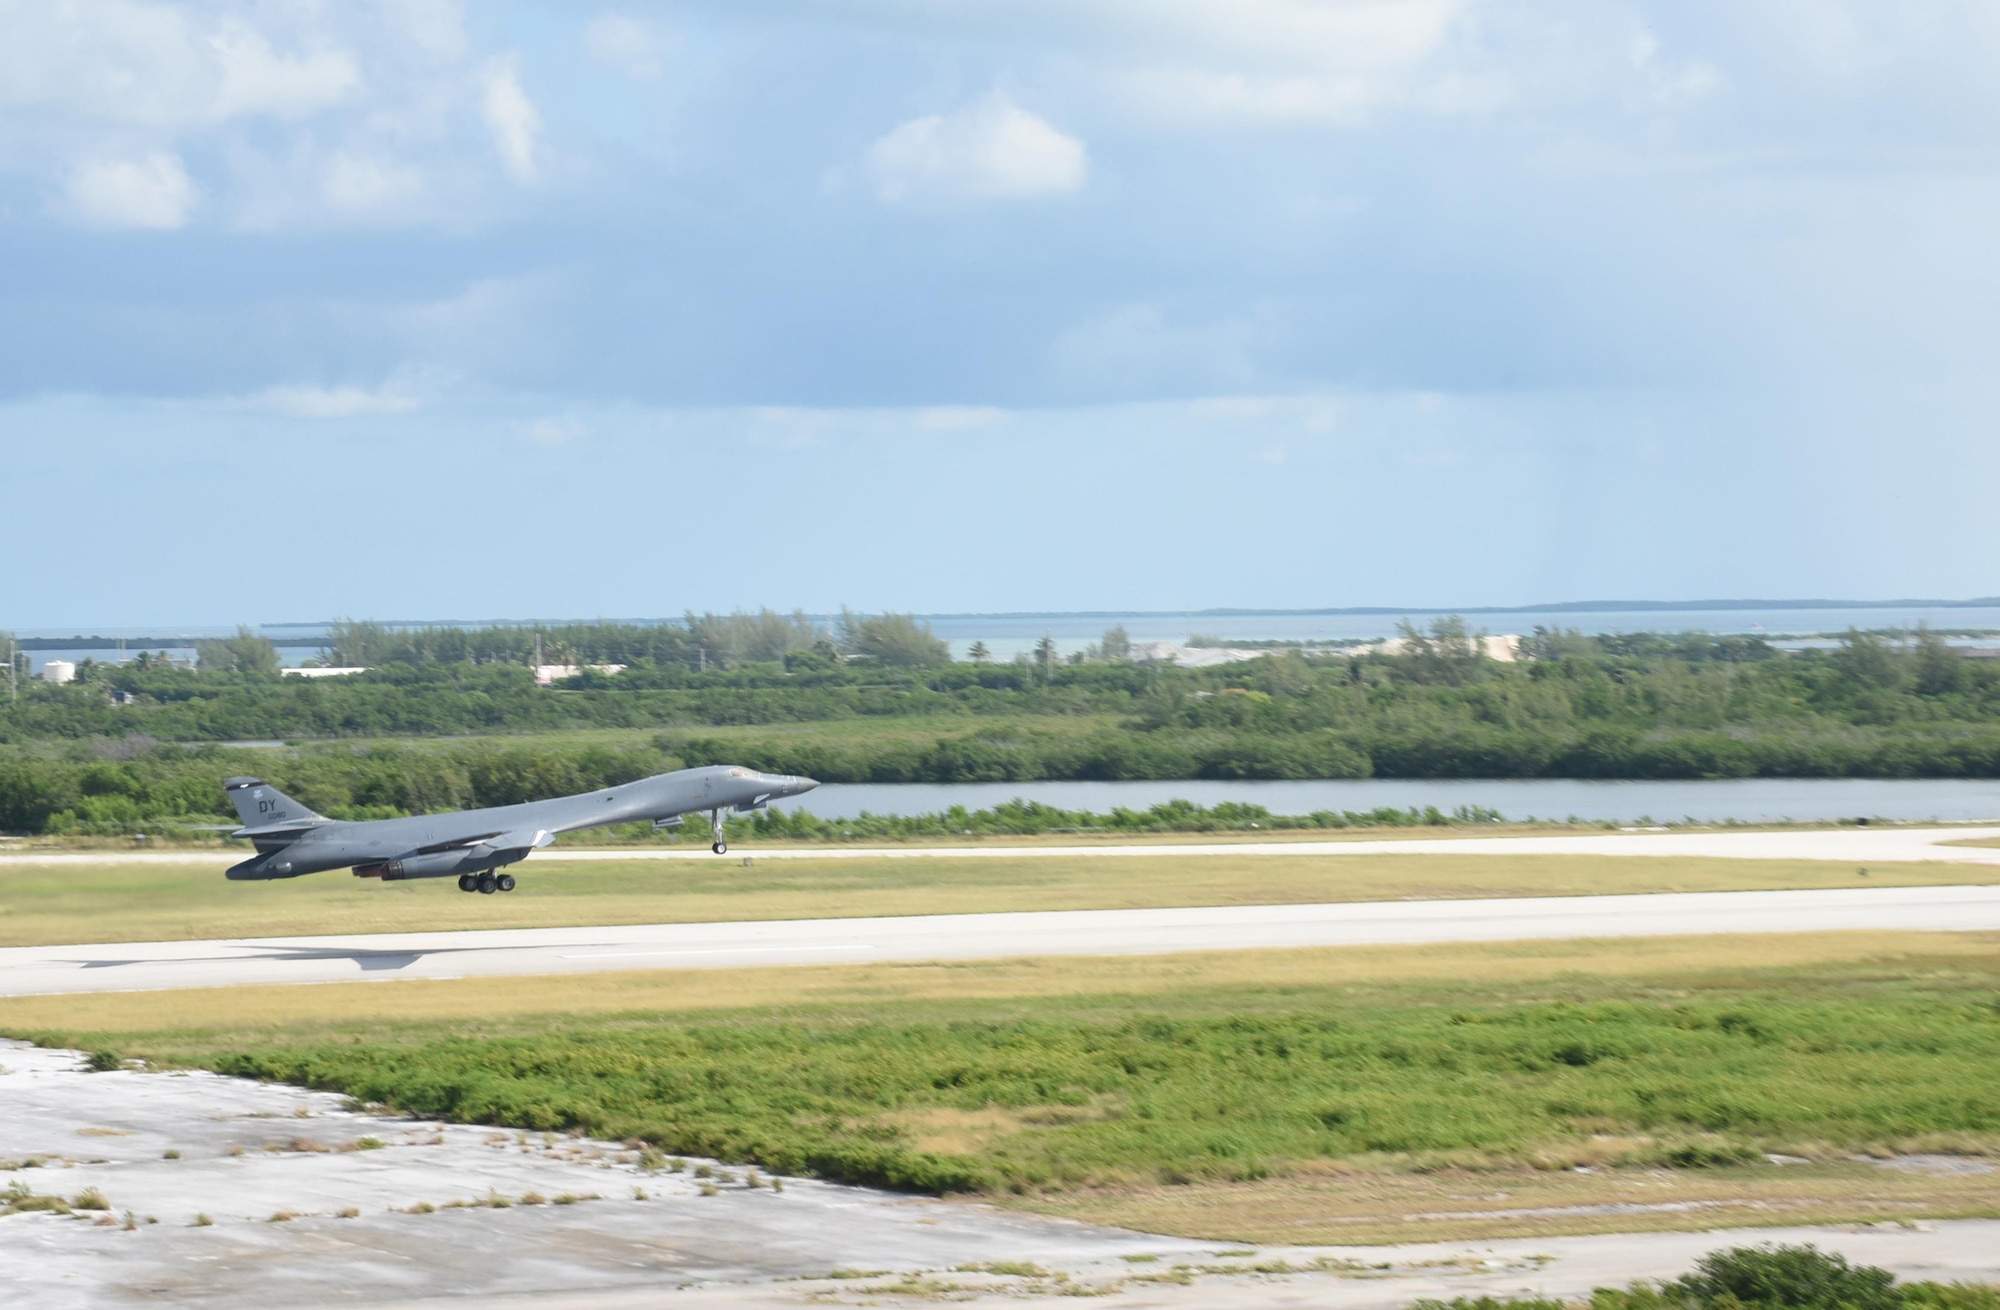 A B-1B Lancer from the Air Force’s 9th Bomb Squadron, out of Dyess Air Force Base, Texas, takes off at Naval Air Station Key West’s Boca Chica Field Aug. 23, 2016 in support of Joint Interagency Task Force South’s mission of detection and monitoring of illicit trafficking. Last week, the
Air Force deliberately increased its aircraft operations in support of JIATF South in an effort to leverage multi-domain operations, which integrates information gleaned from intelligence, space and cyber domains in for a common objective.  From March 2015 to April 2016 the Air Force
conducted 278 hours of force-packaged counter-narcotics operations to assist the U.S. Coast Guard and Partner Nations in the interdiction of 14 metric tons of cocaine worth about $437 million.  (U.S. Navy Photo by Mass Communication Specialist 2nd Class Cody R. Babin/Released)
